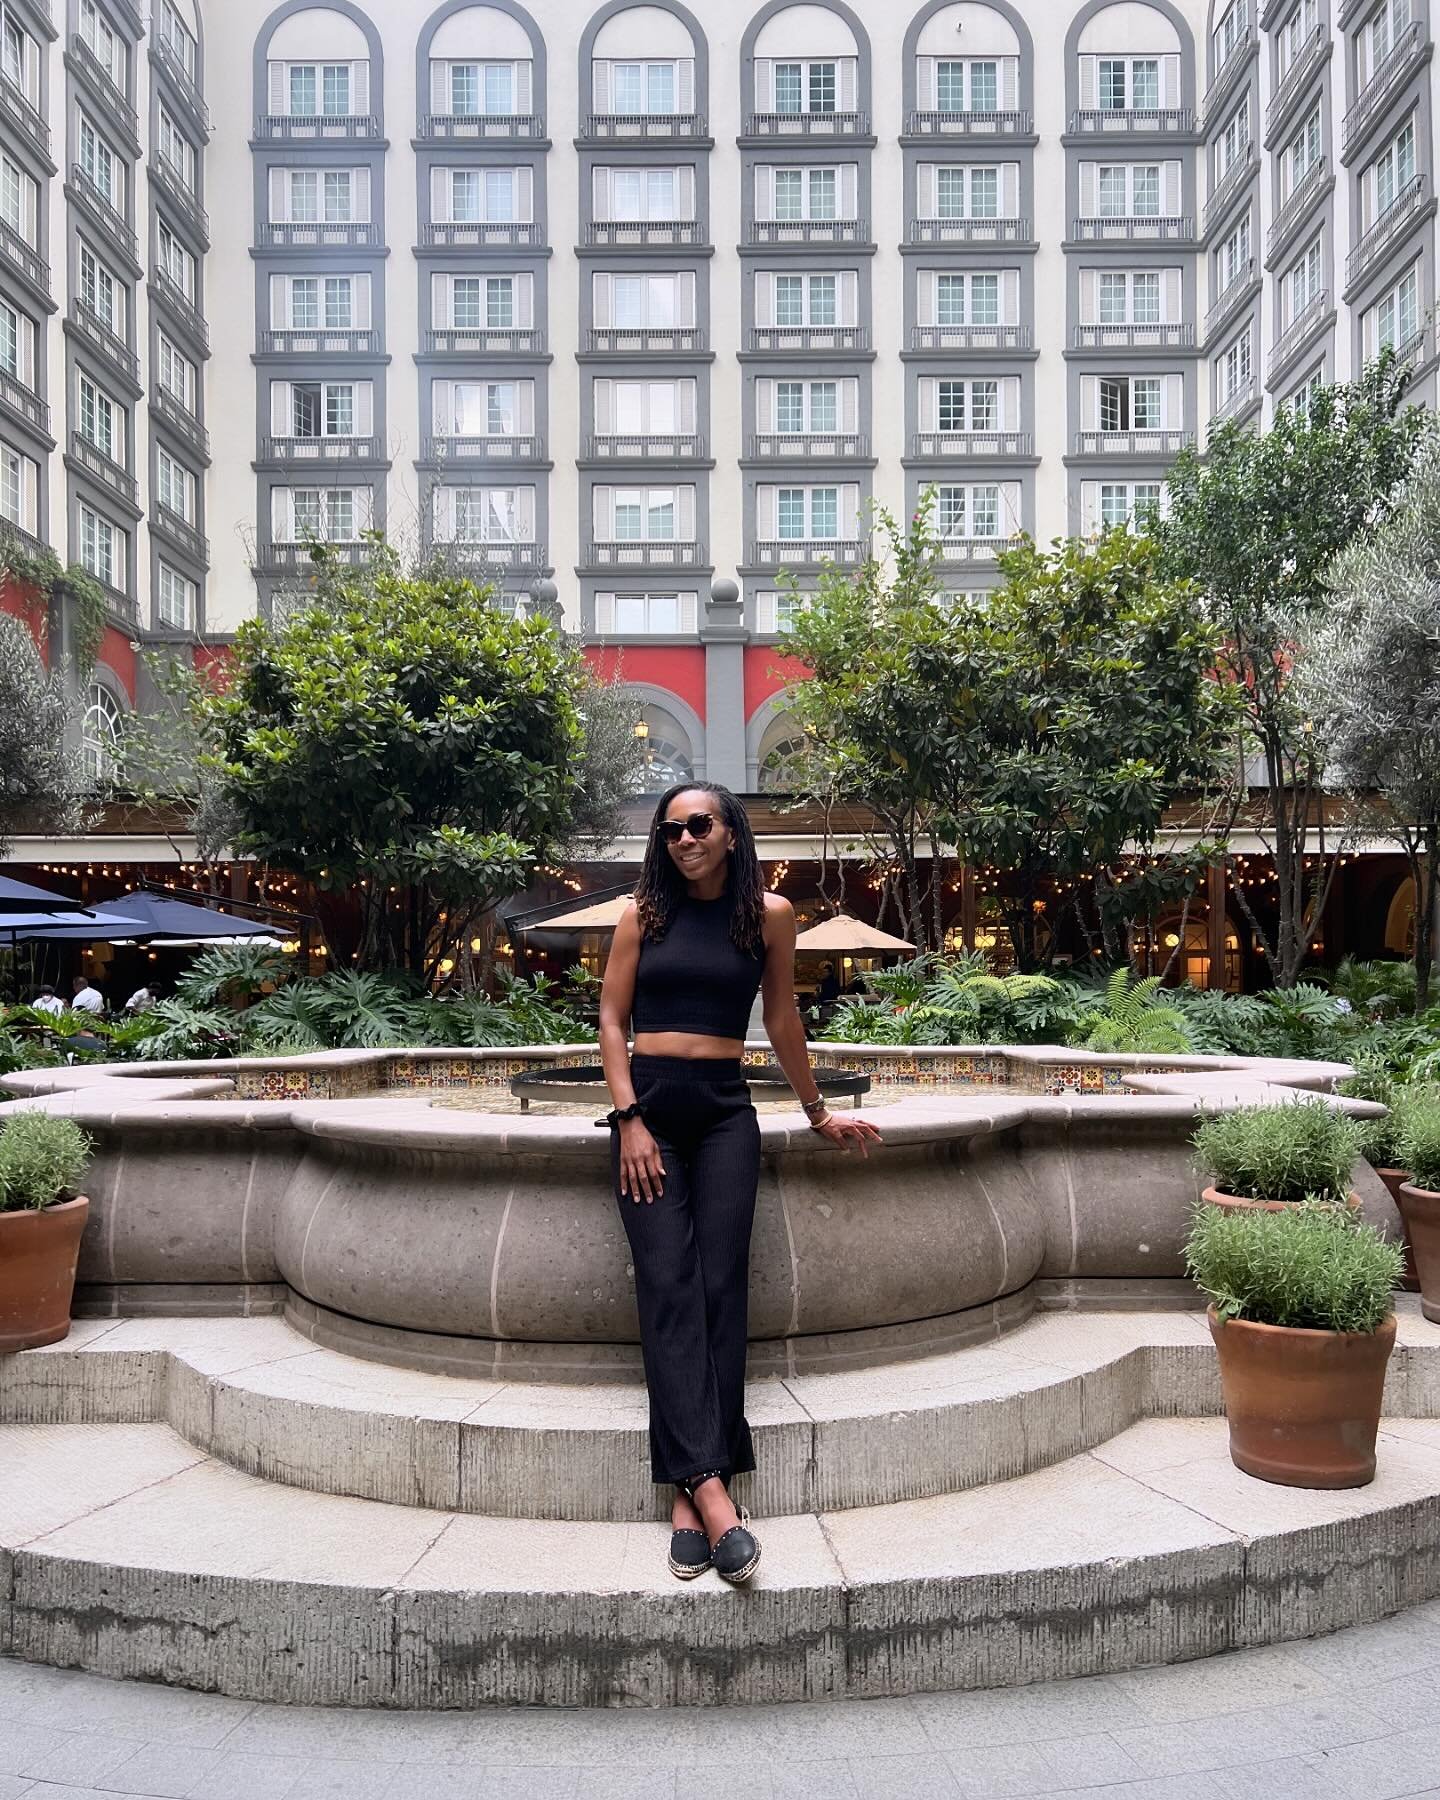 It&rsquo;s been a while since I&rsquo;ve done an intro&hellip; so come say hello!

My name is Amina and I&rsquo;m a luxury travel advisor and the owner of @perspectivestravel. I&rsquo;ve lived in New Orleans since 2012 (+2 years from &lsquo;08-&lsquo